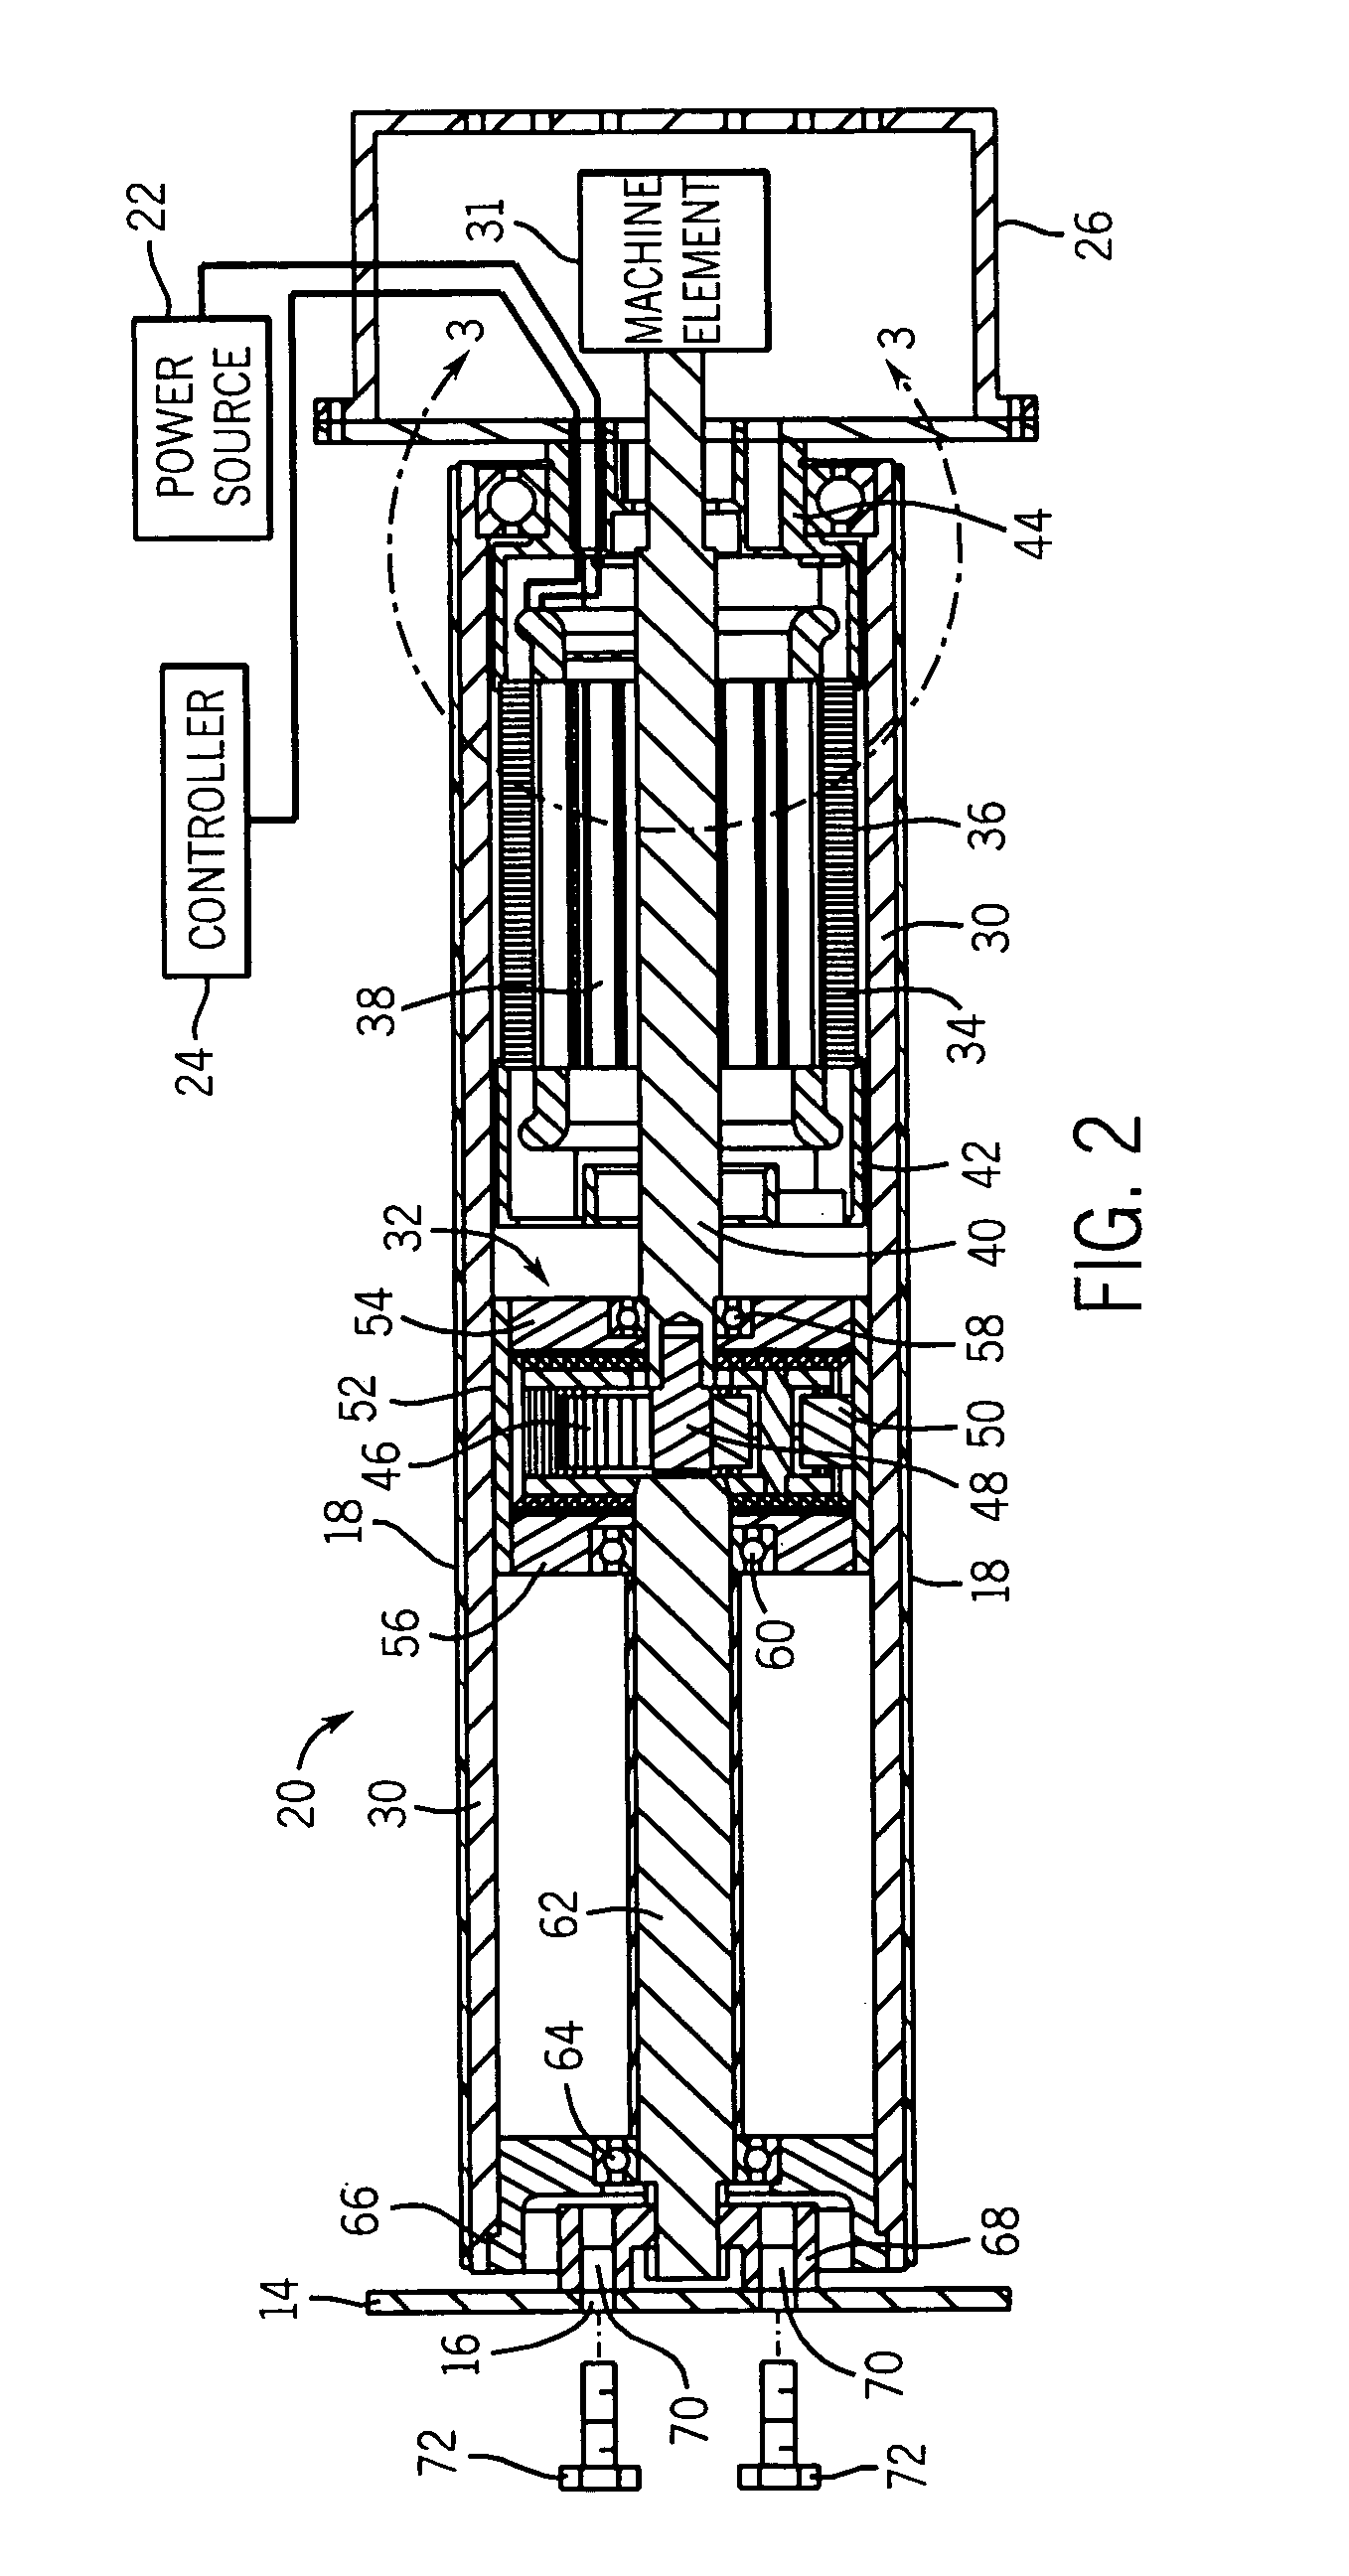 Motorized pulley